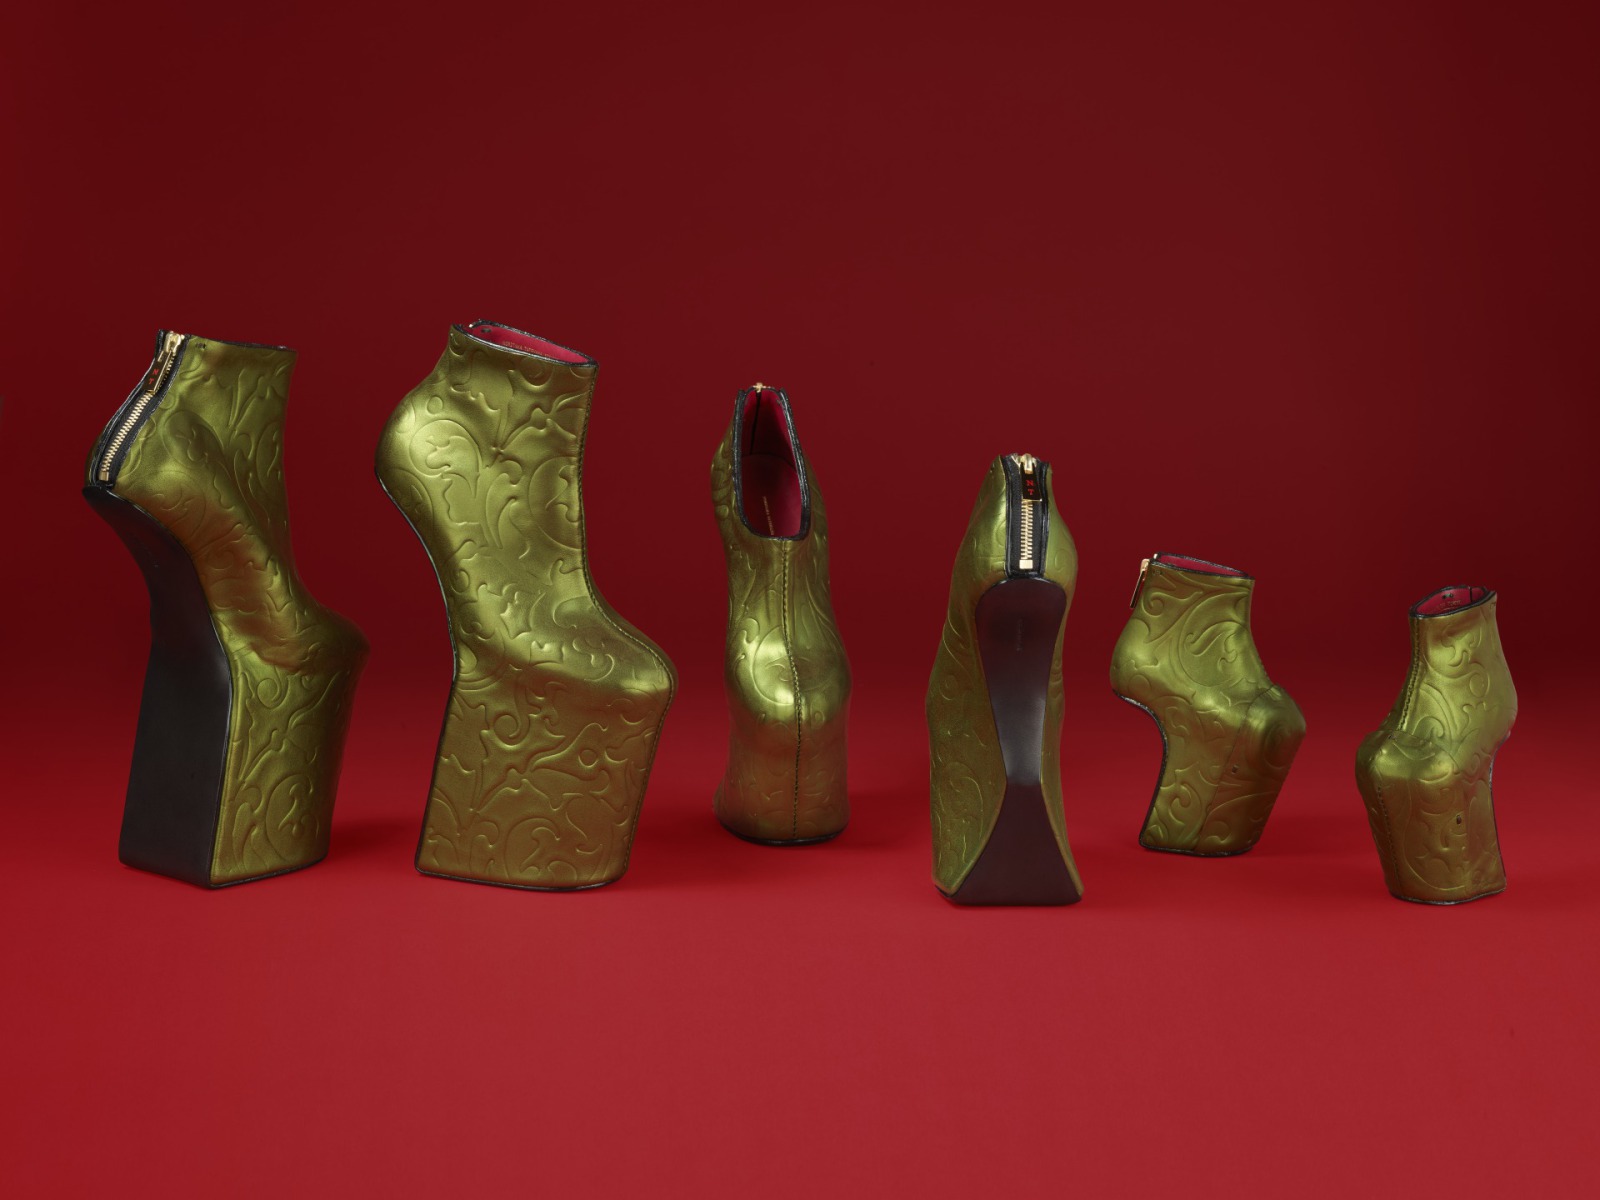 [Isehan Honten] – Heel-less shoes dyed with Japanese Beni dye added to collection at Victoria and Albert Museum